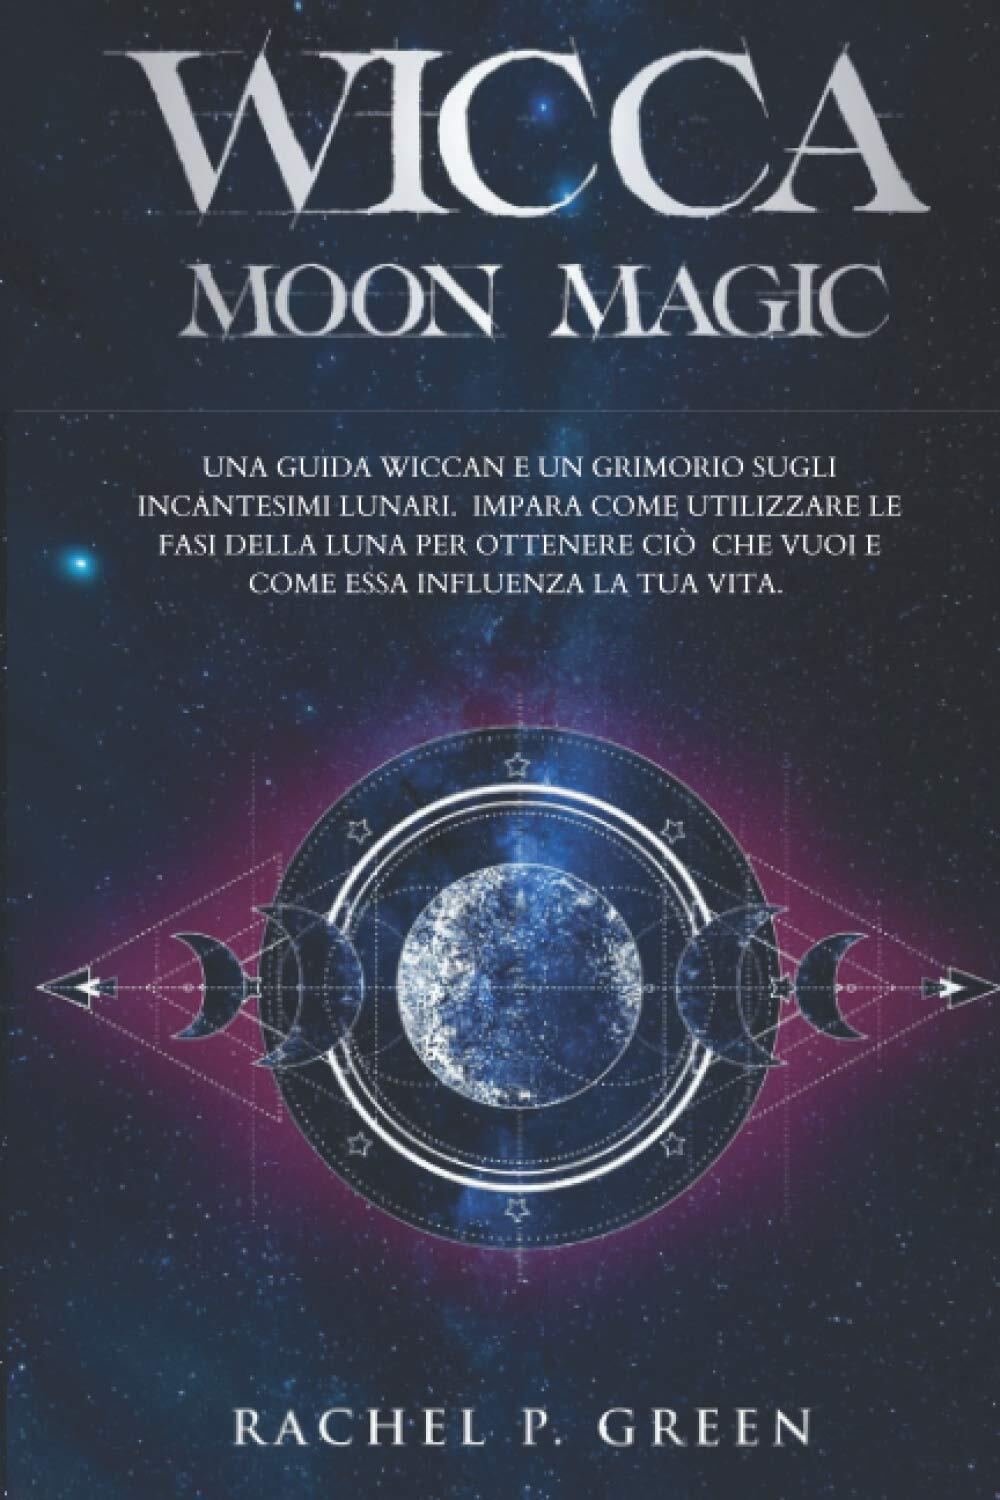 Wicca Moon Magic - Rachel P. Green - Independently published, 2020